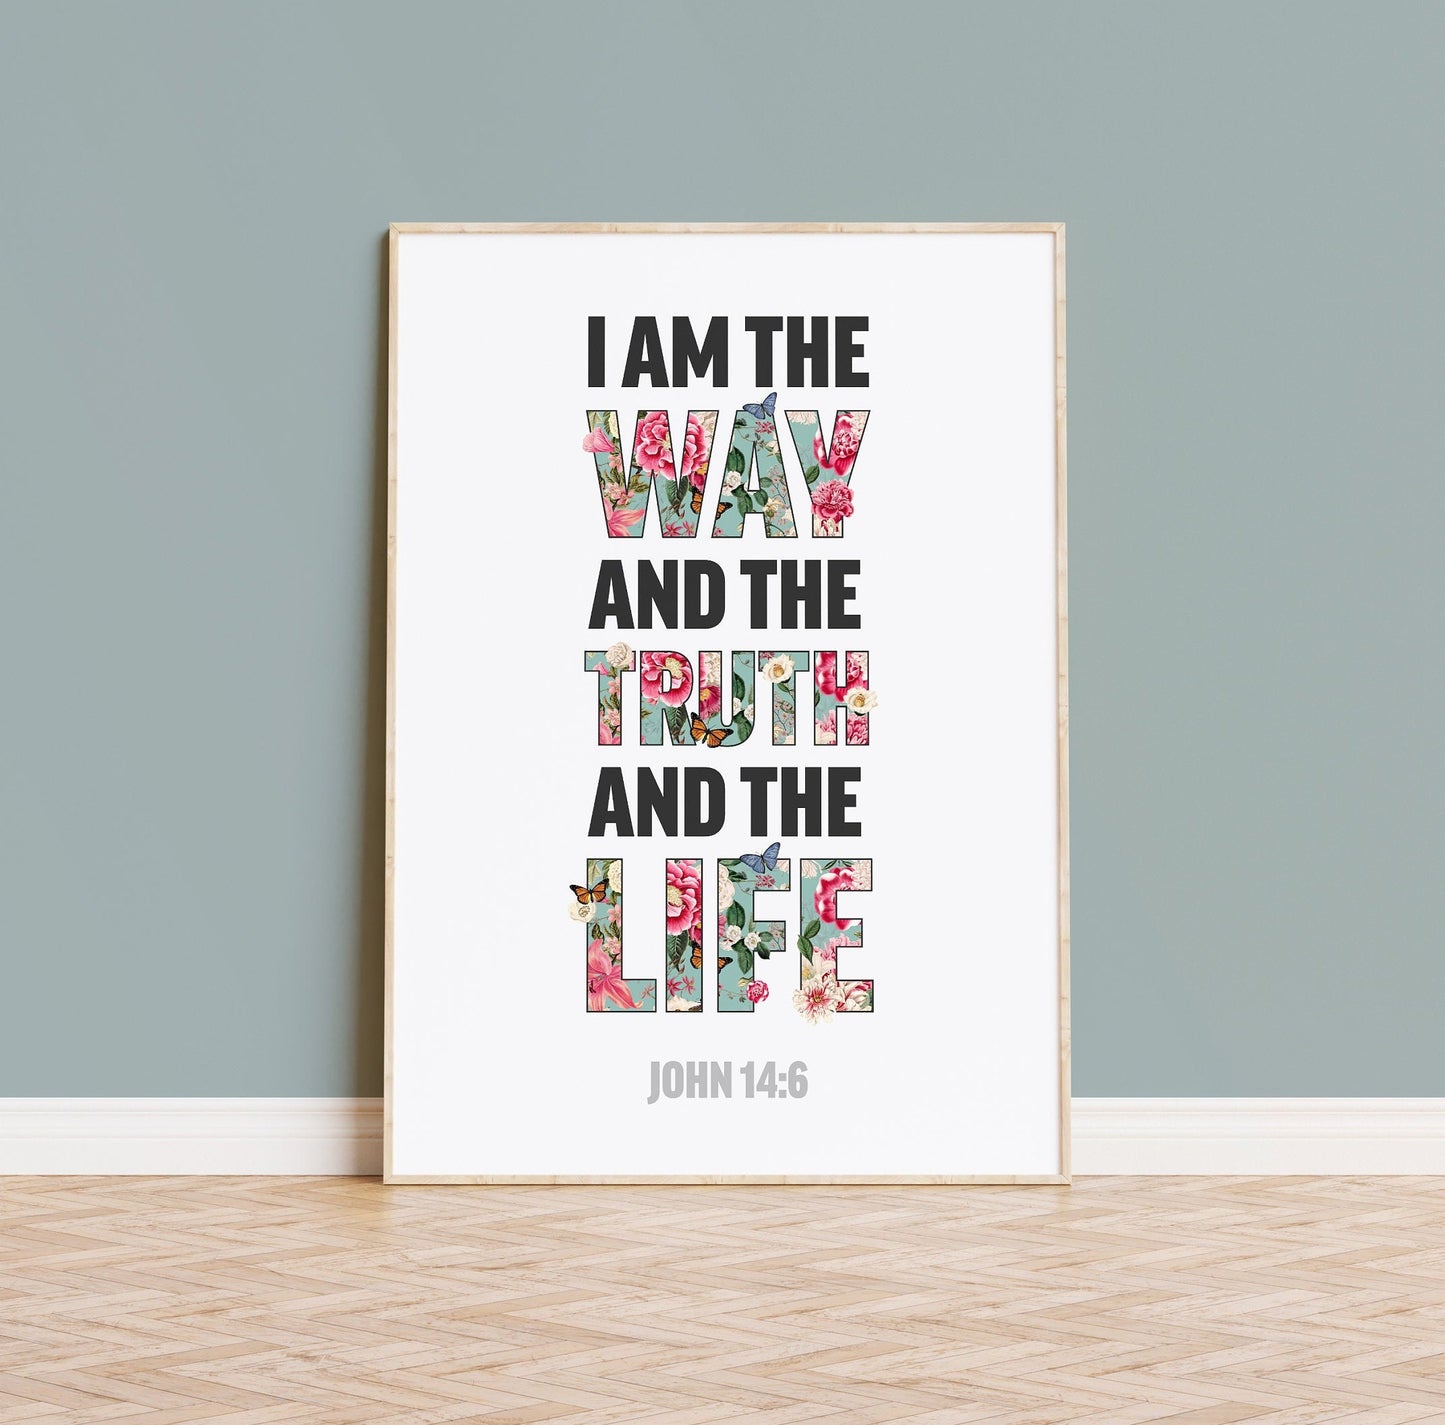 I am the way, and the truth and the life, John 14 verse 6, Christian poster, Bible Wall art